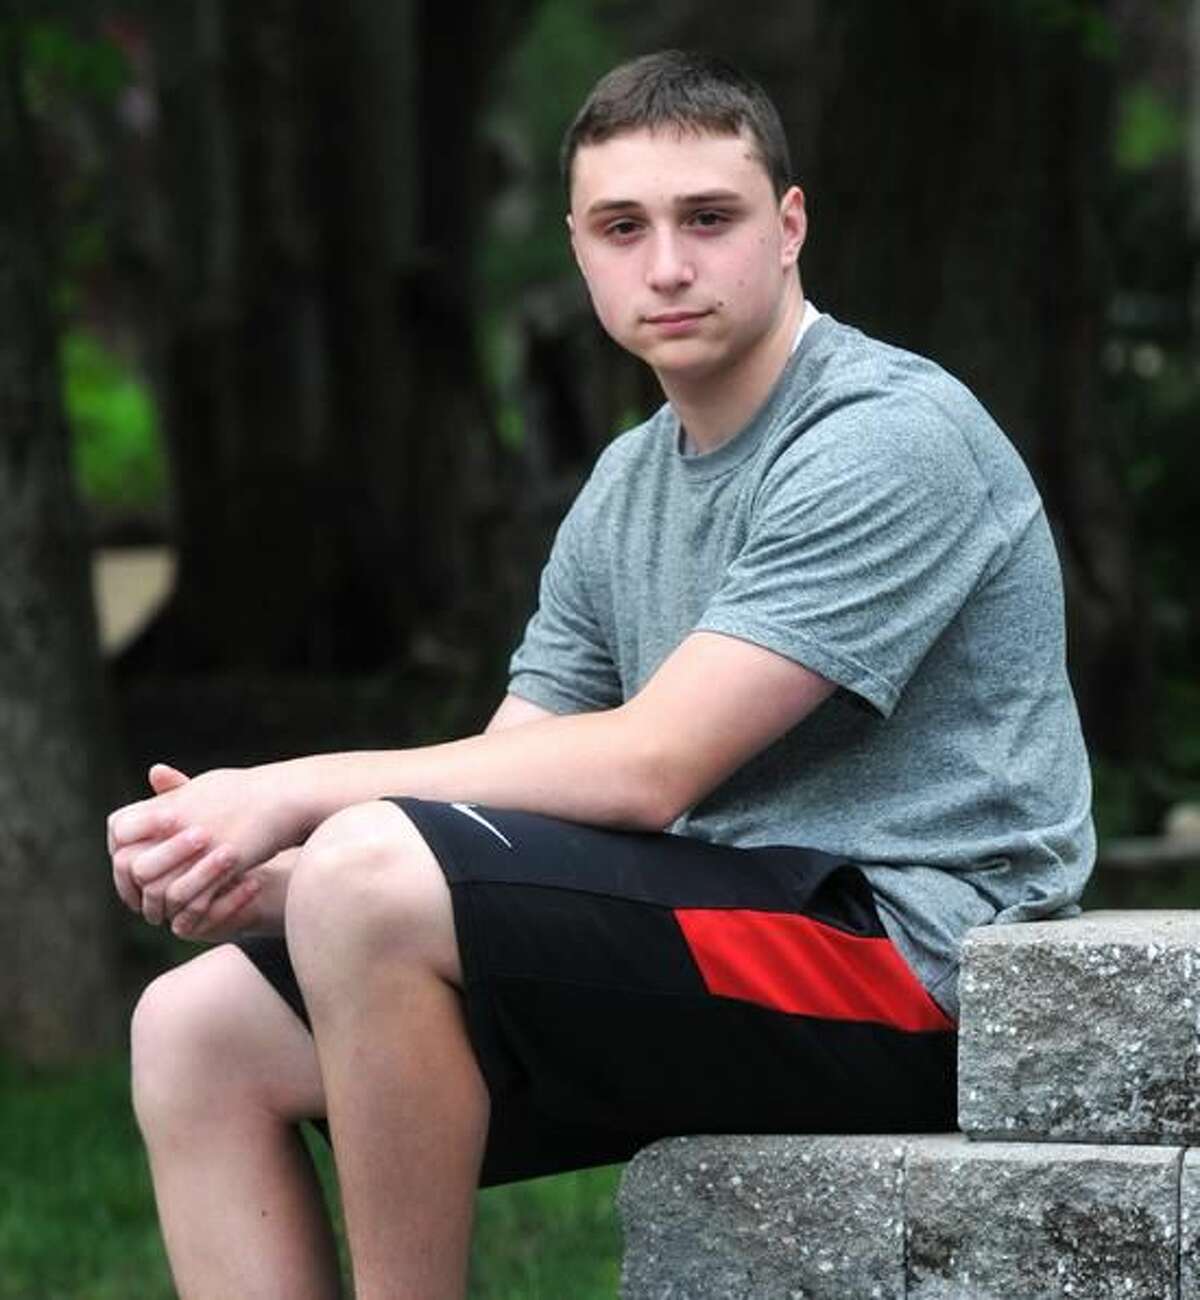 Cheshire—14-Year-old Zach Dubois of Cheshire helped save a man in his neighborhood who had badly injured himself with a chainsaw after he apparently fell off a stepladder. The man was unconscious when Dubois found him. Peter Casolino/New Haven Register 05/10/12